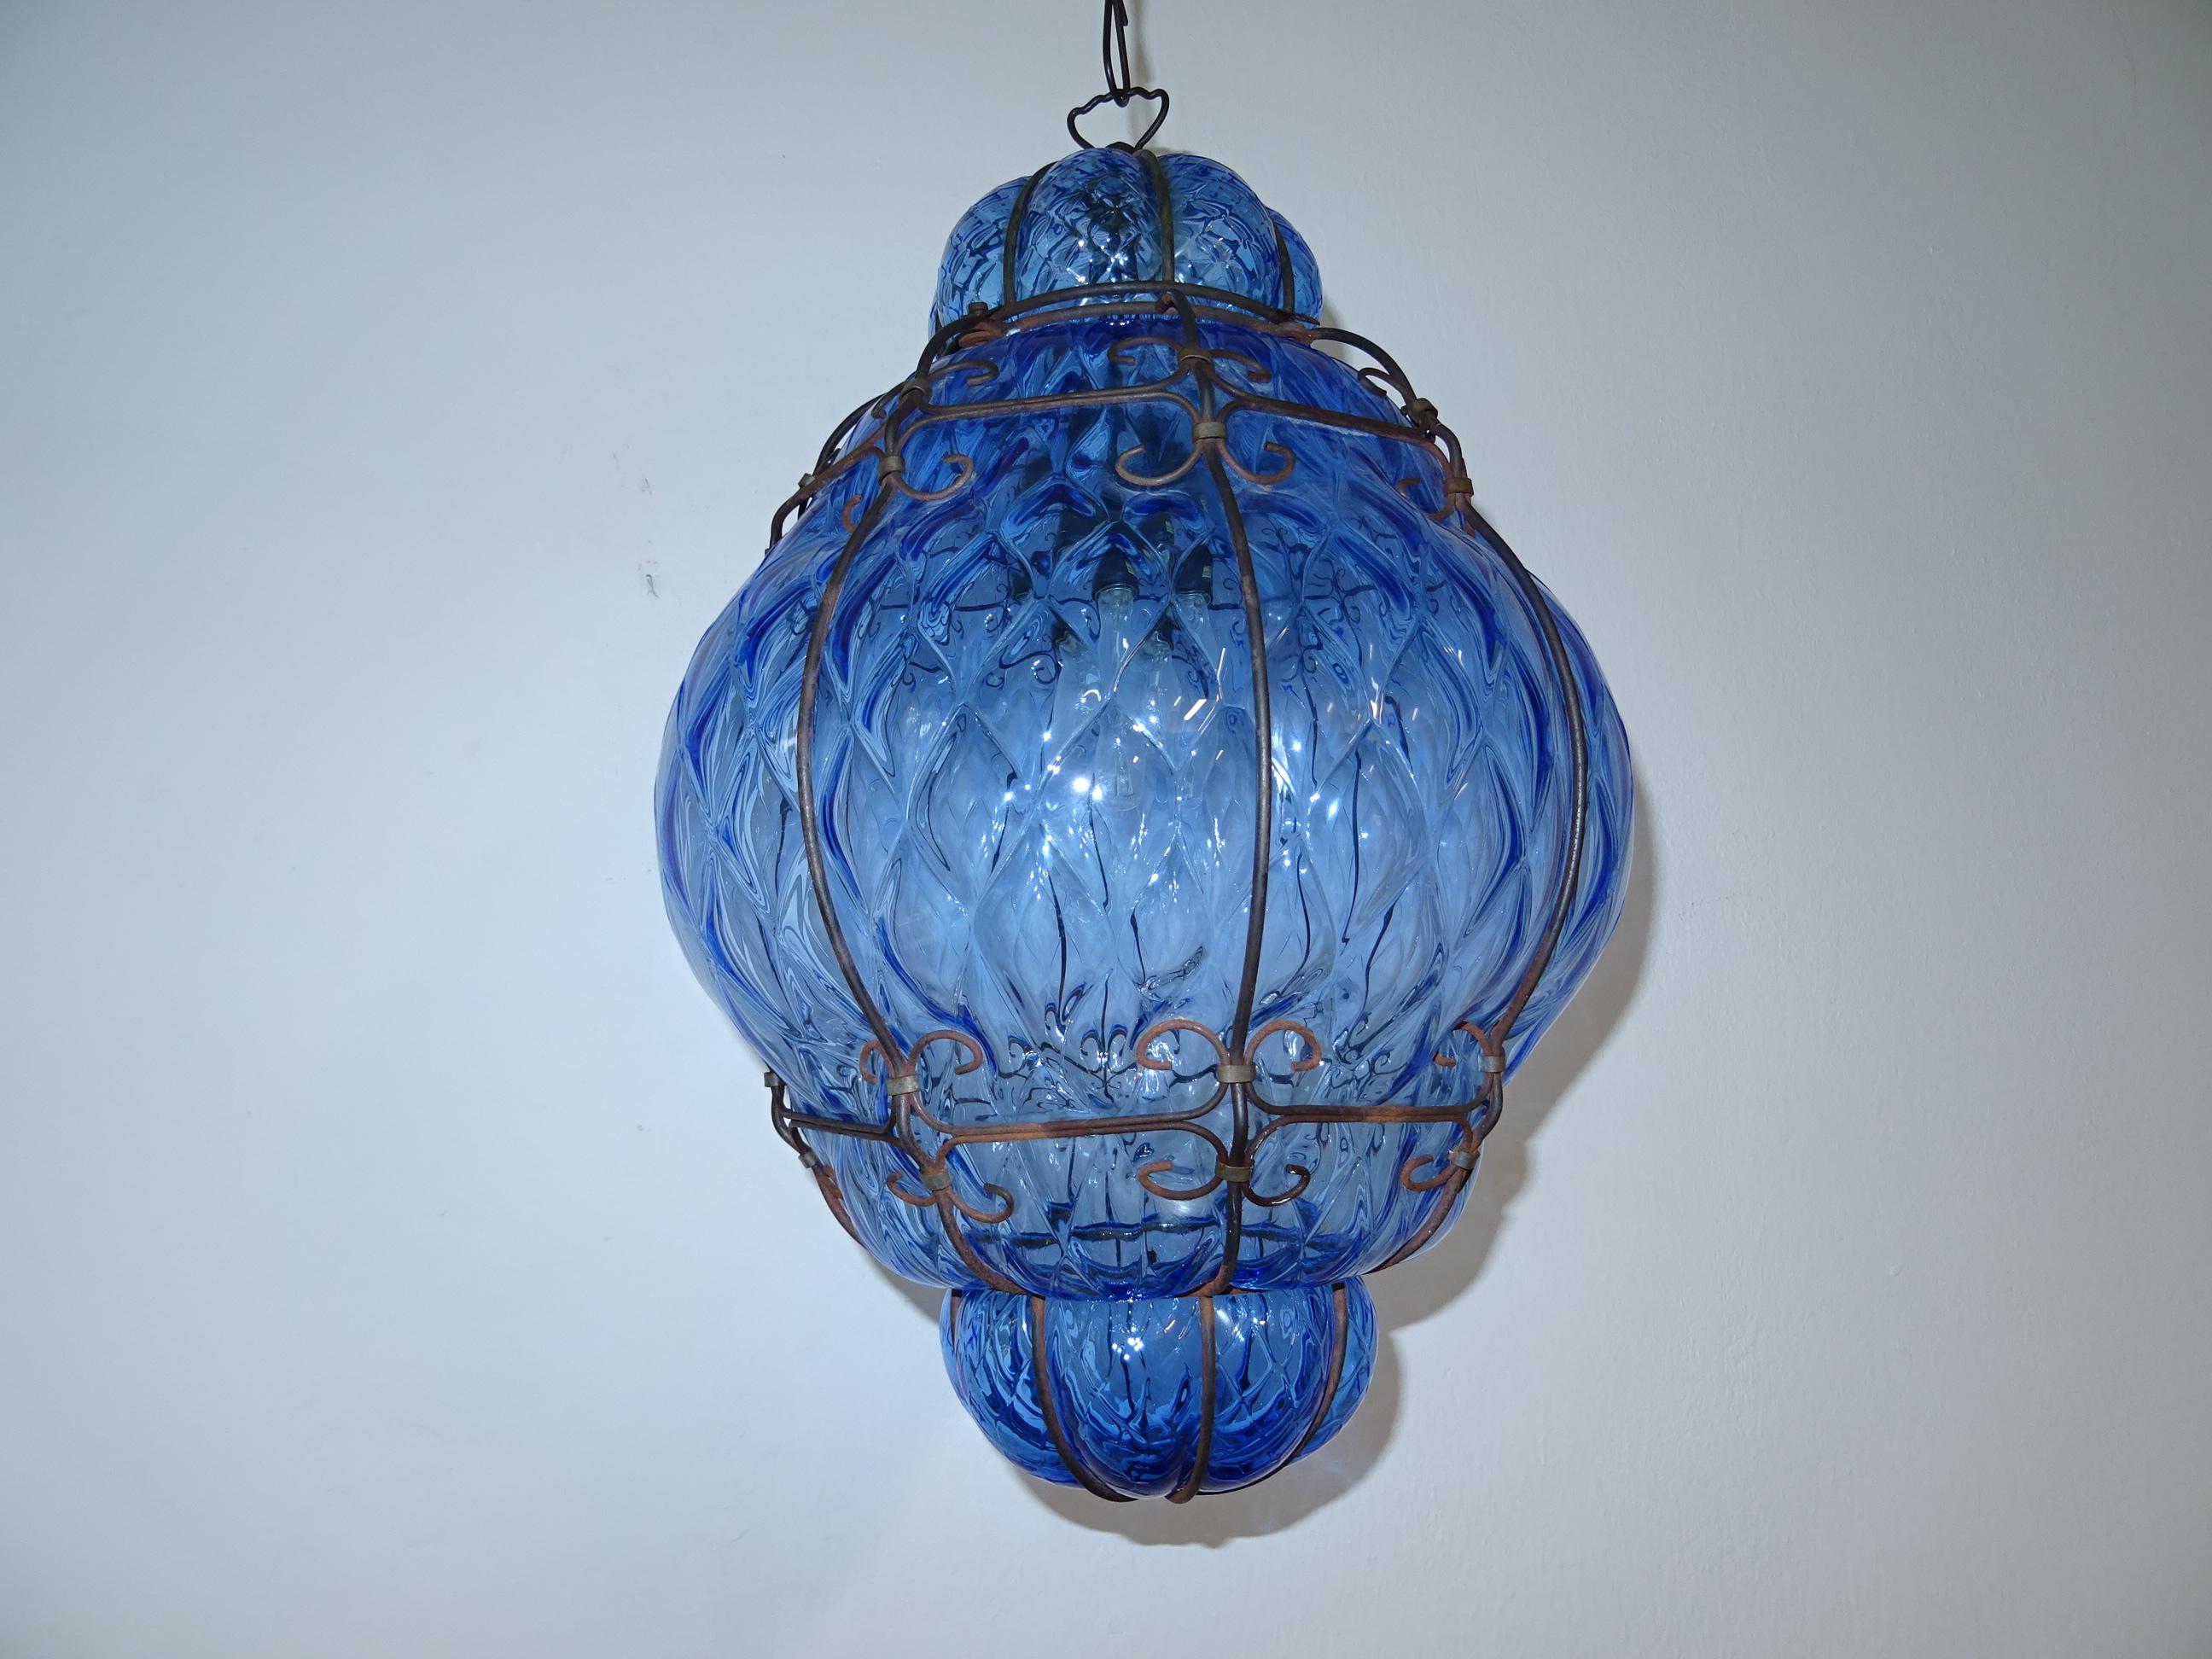 Housing one-light. Will be rewired with certified UL US sockets for the United States or appropriate socket for other countries and ready to hang. Rare big size and color of cobalt blue Murano blown glass in metal cage. Great craftsmanship. Adding